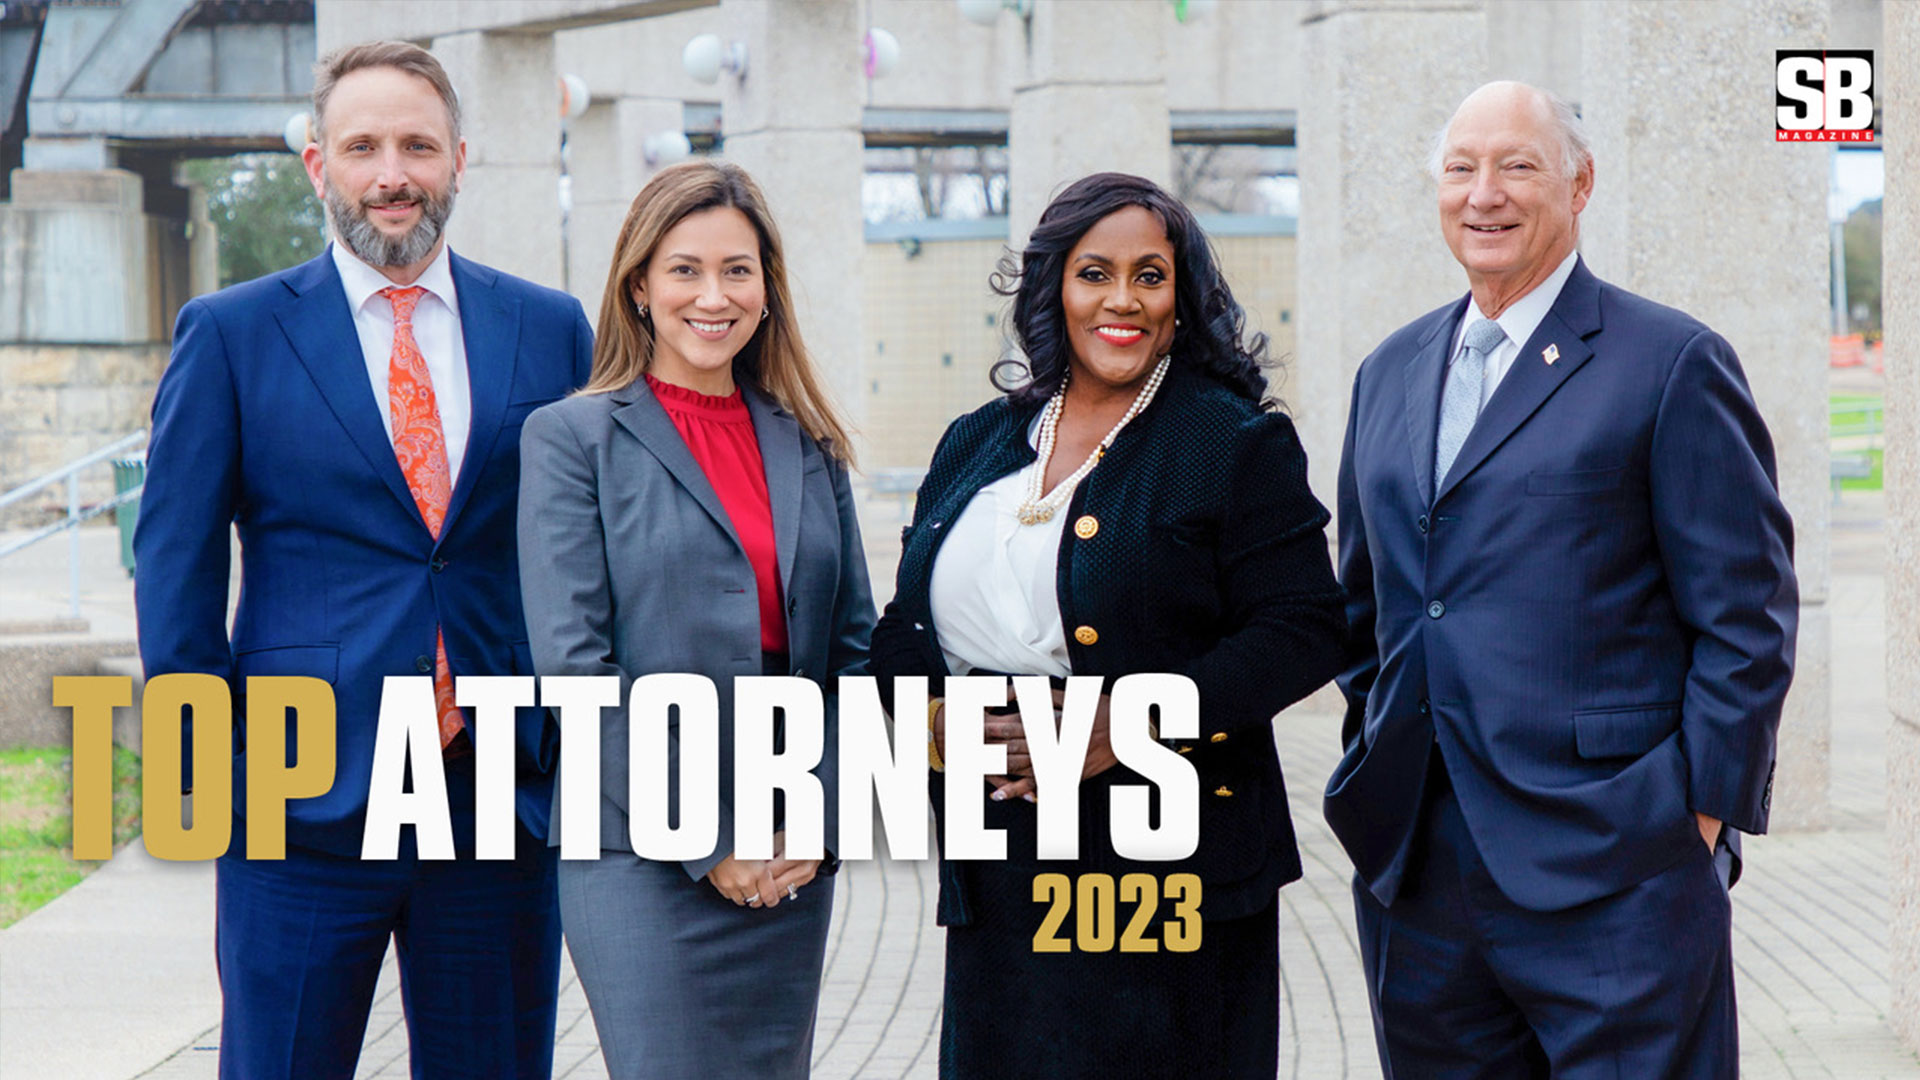 TOP ATTORNEYS COVER 2023 